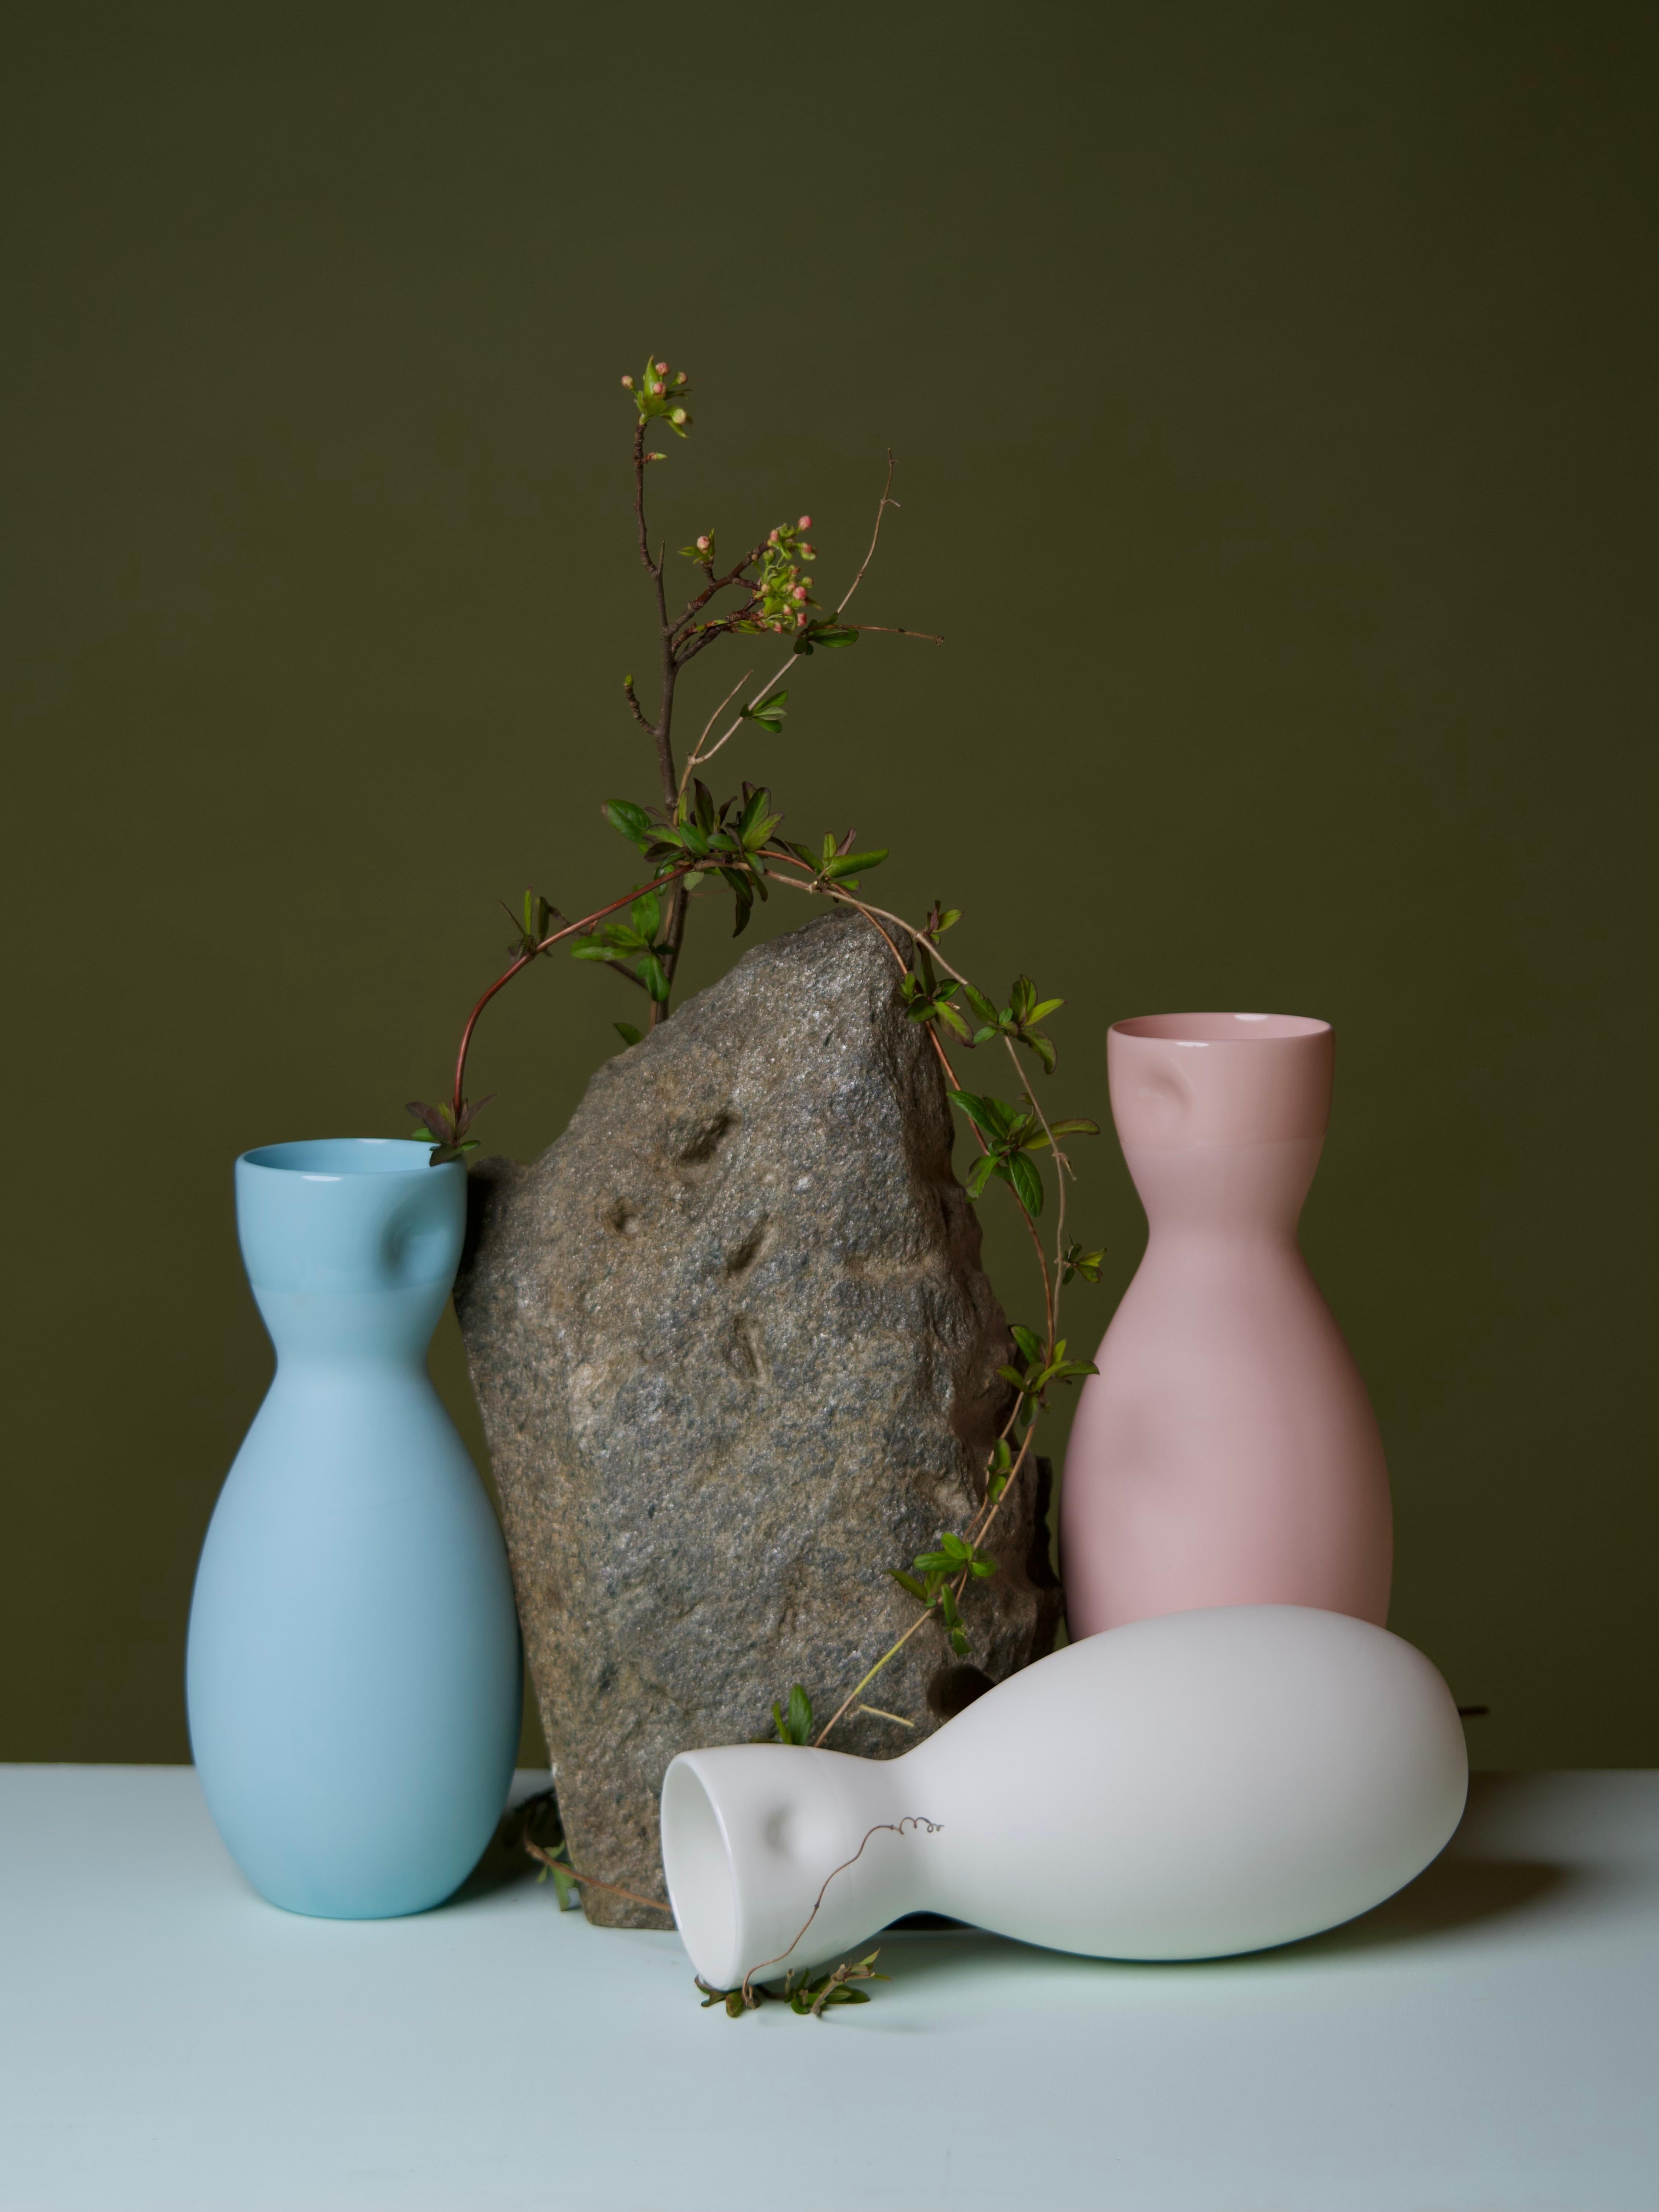 Middle Kingdom dimpled porcelain carafes are designed by Carola Zee of Rotterdam, Holland. Each carafe is molded and then dimpled by the hand of the potter to create a unique and comfortable hold. There are three colors available, and corresponding